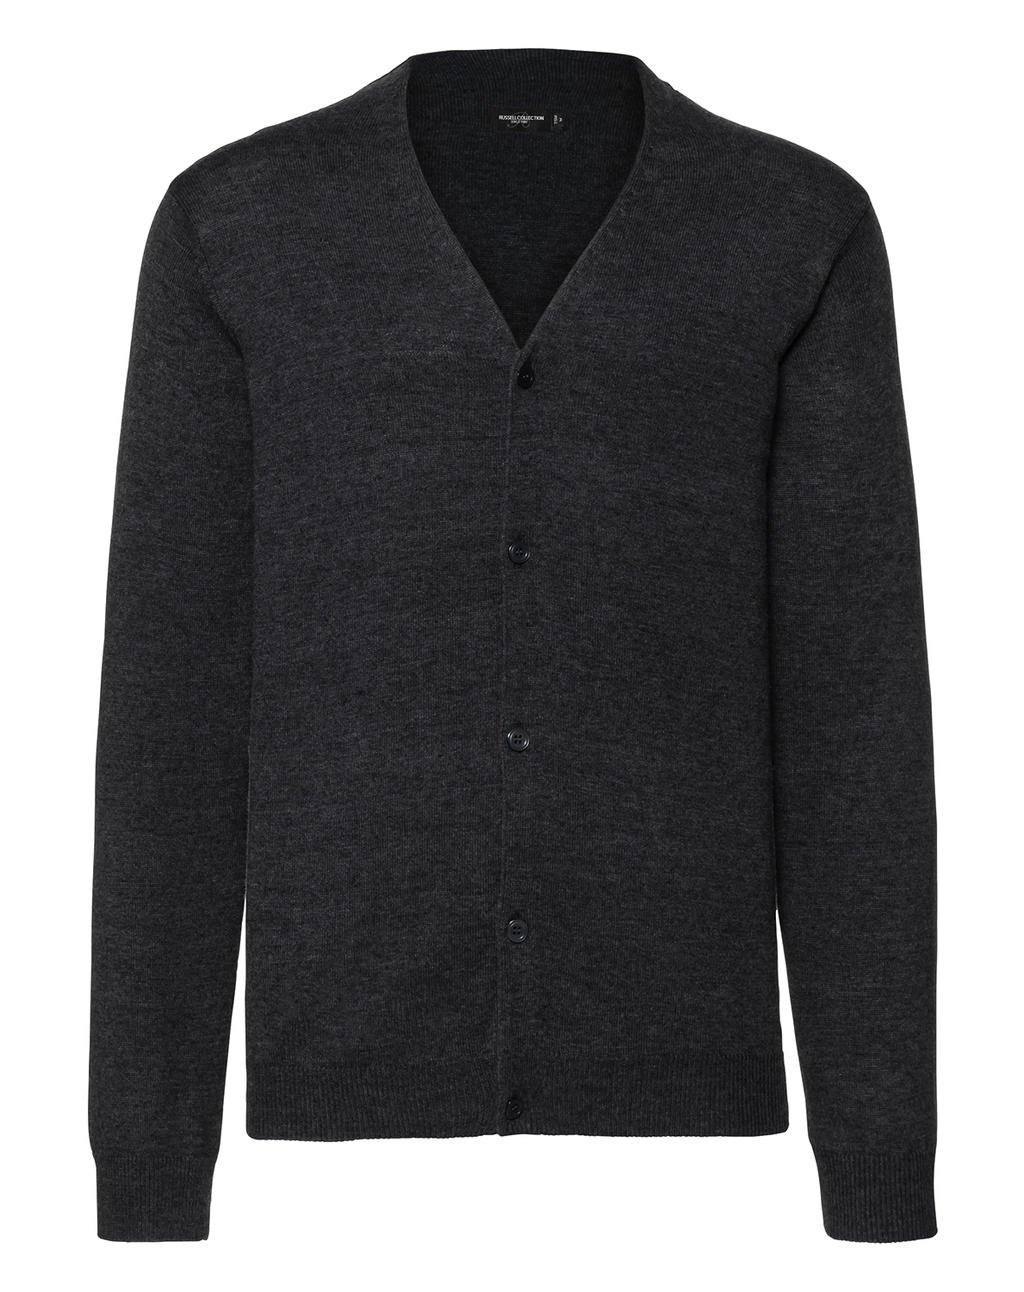  Mens V-Neck Knitted Cardigan in Farbe Charcoal Marl